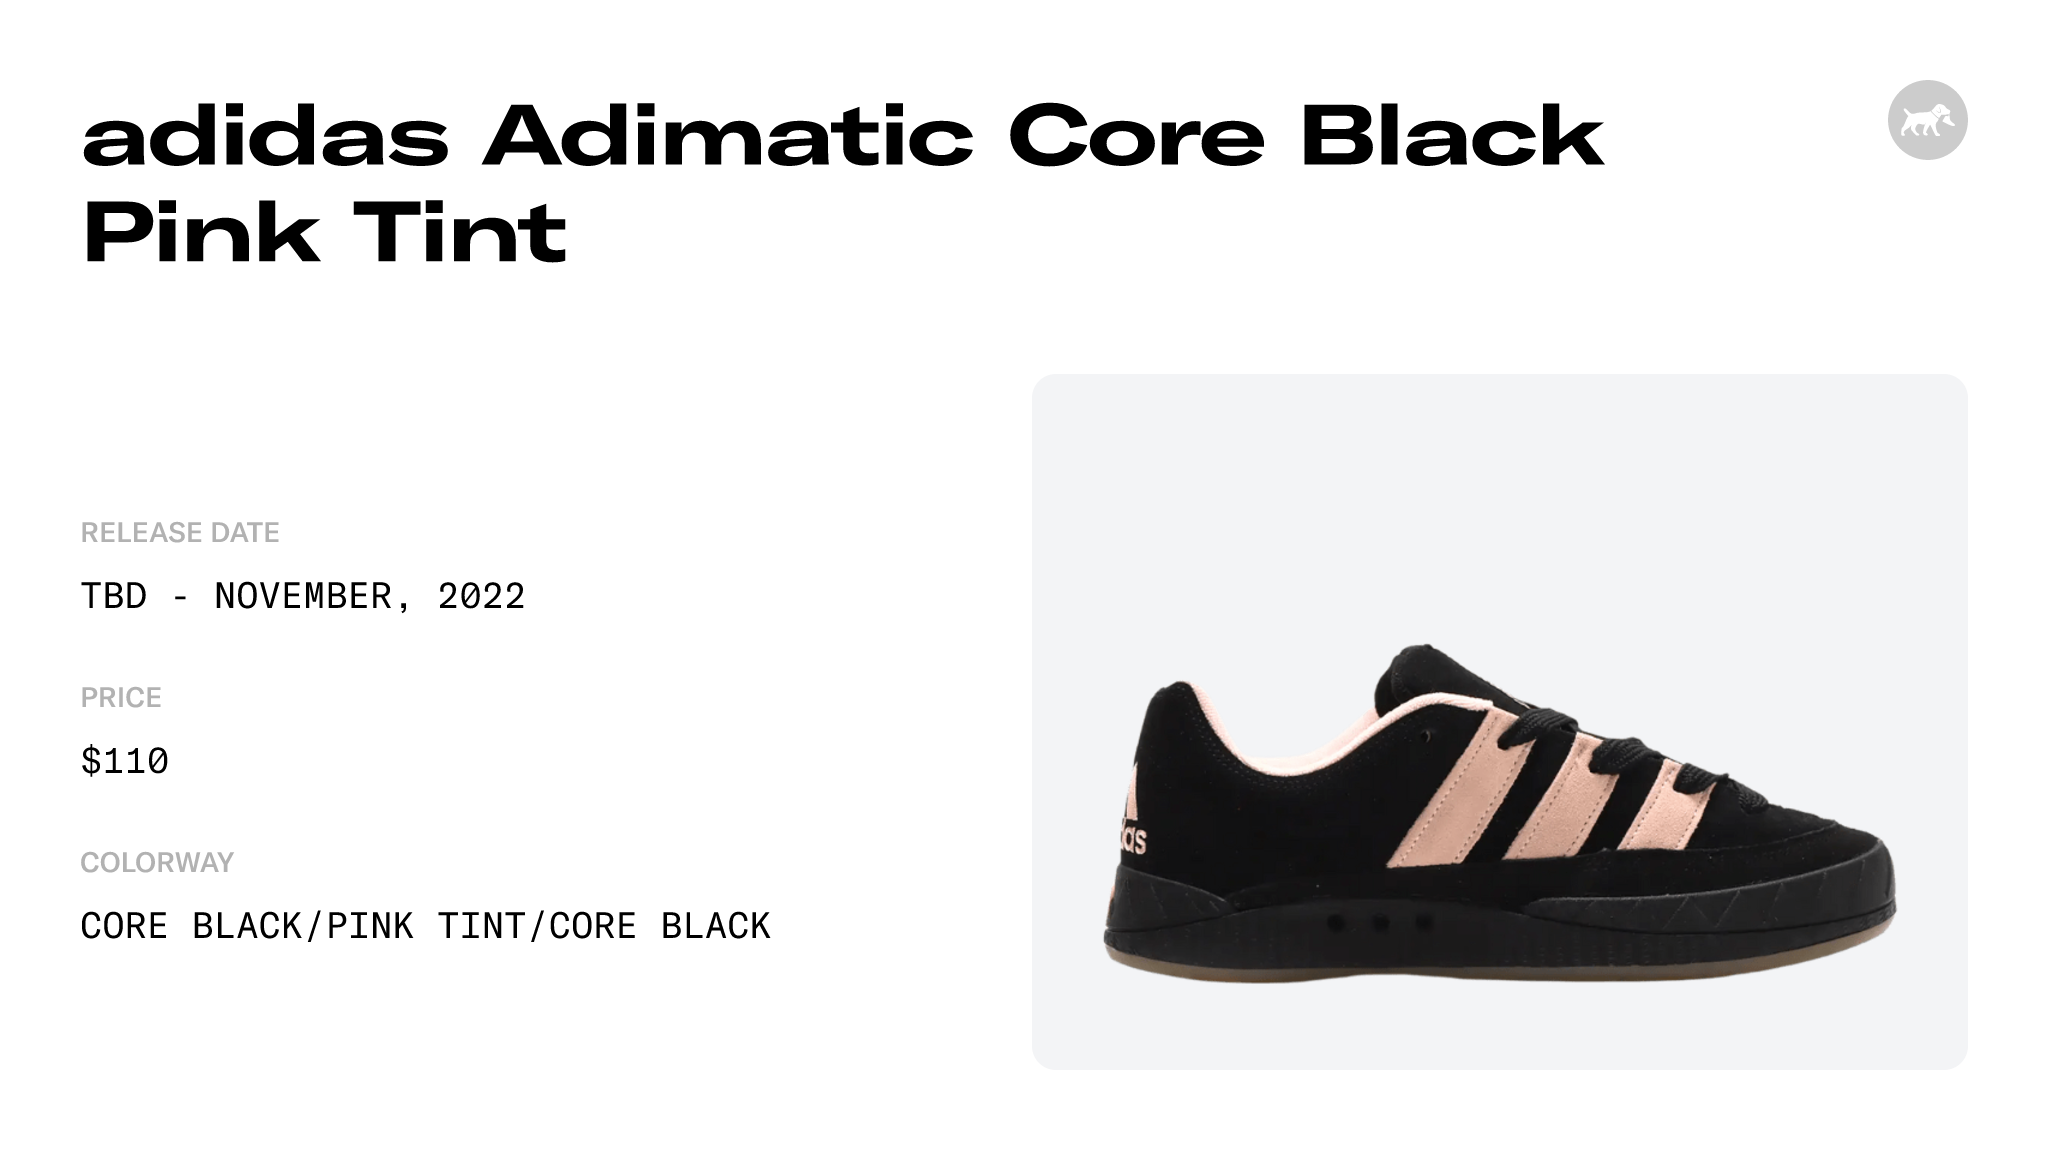 adidas Adimatic Core Black Pink Tint - GY2092 Raffles and Release Date